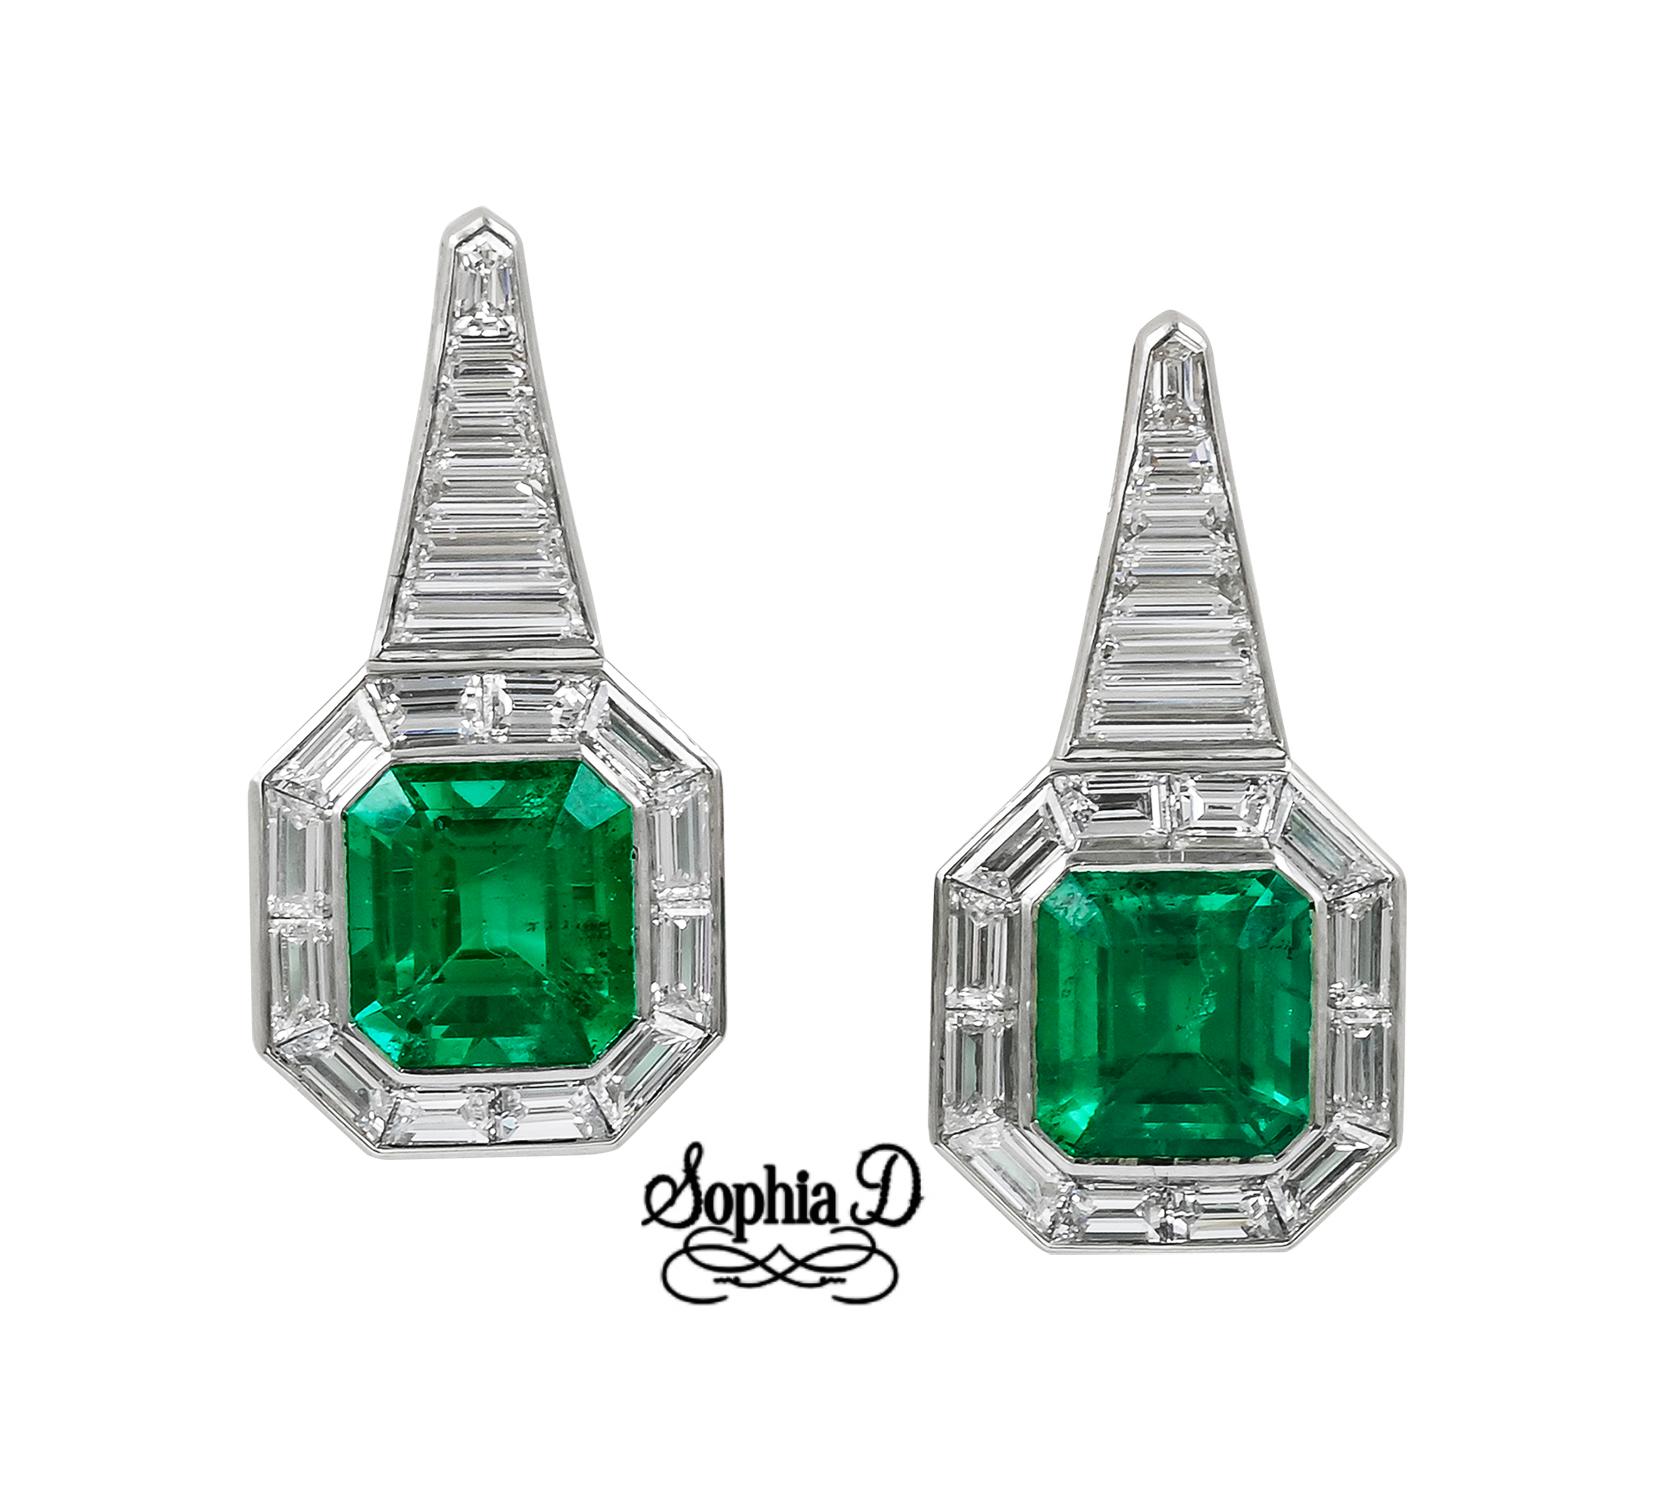 Beautifully designed platinum earrings by Sophia D that features Colombian emerald stones with total weight of 1.84 carats and 1.86 carats and accentuated with diamonds with total weight of 1.93 carats.

Sophia D by Joseph Dardashti LTD has been